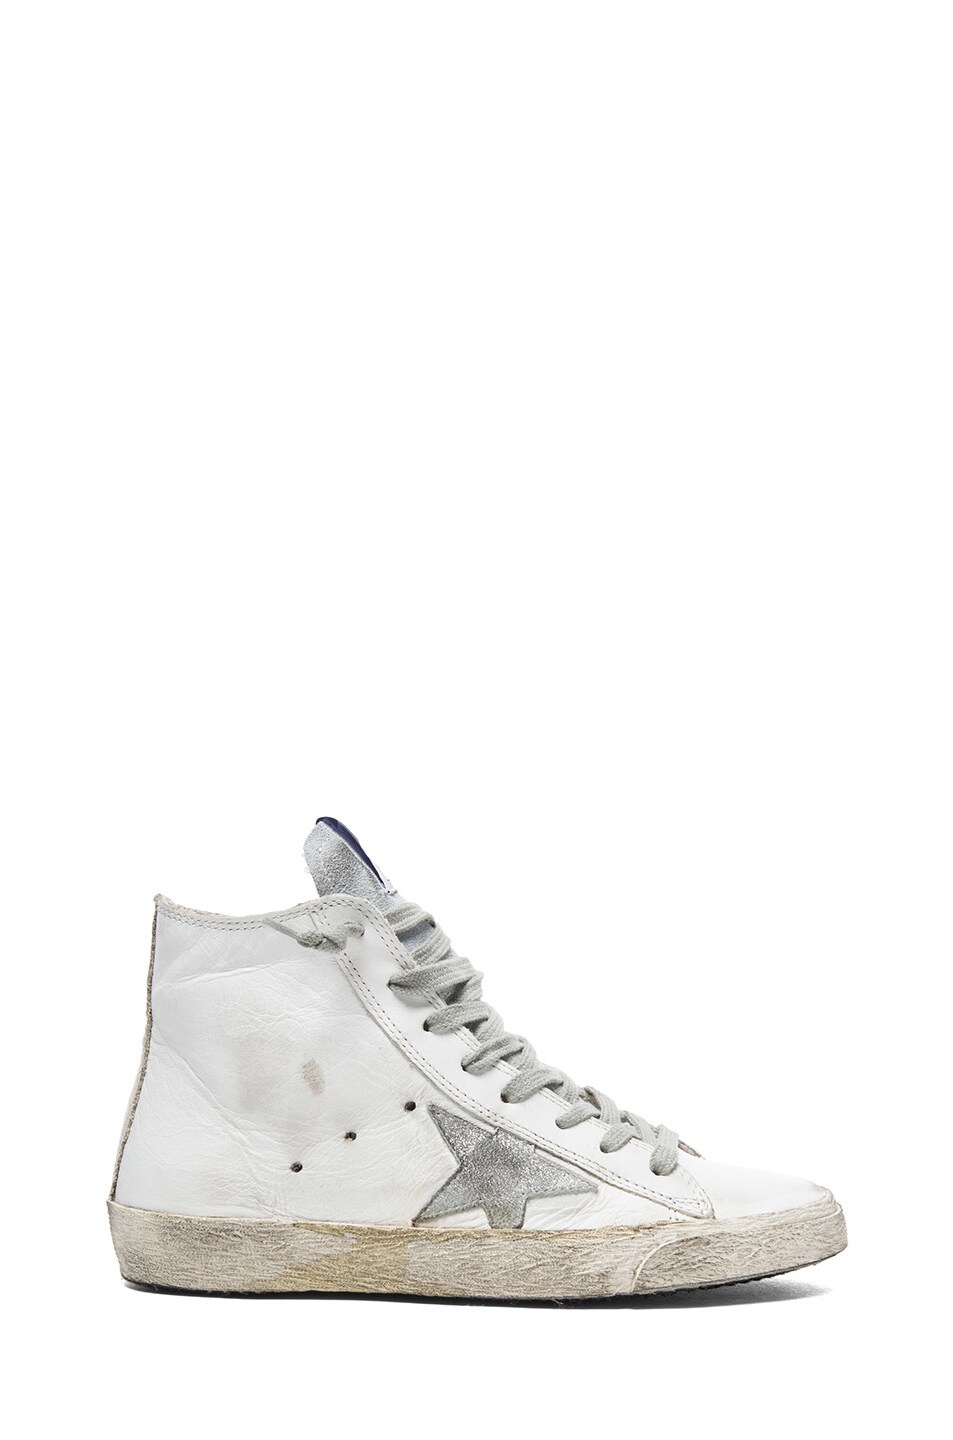 Image 1 of Golden Goose Francy Leather Sneakers in White & Silver